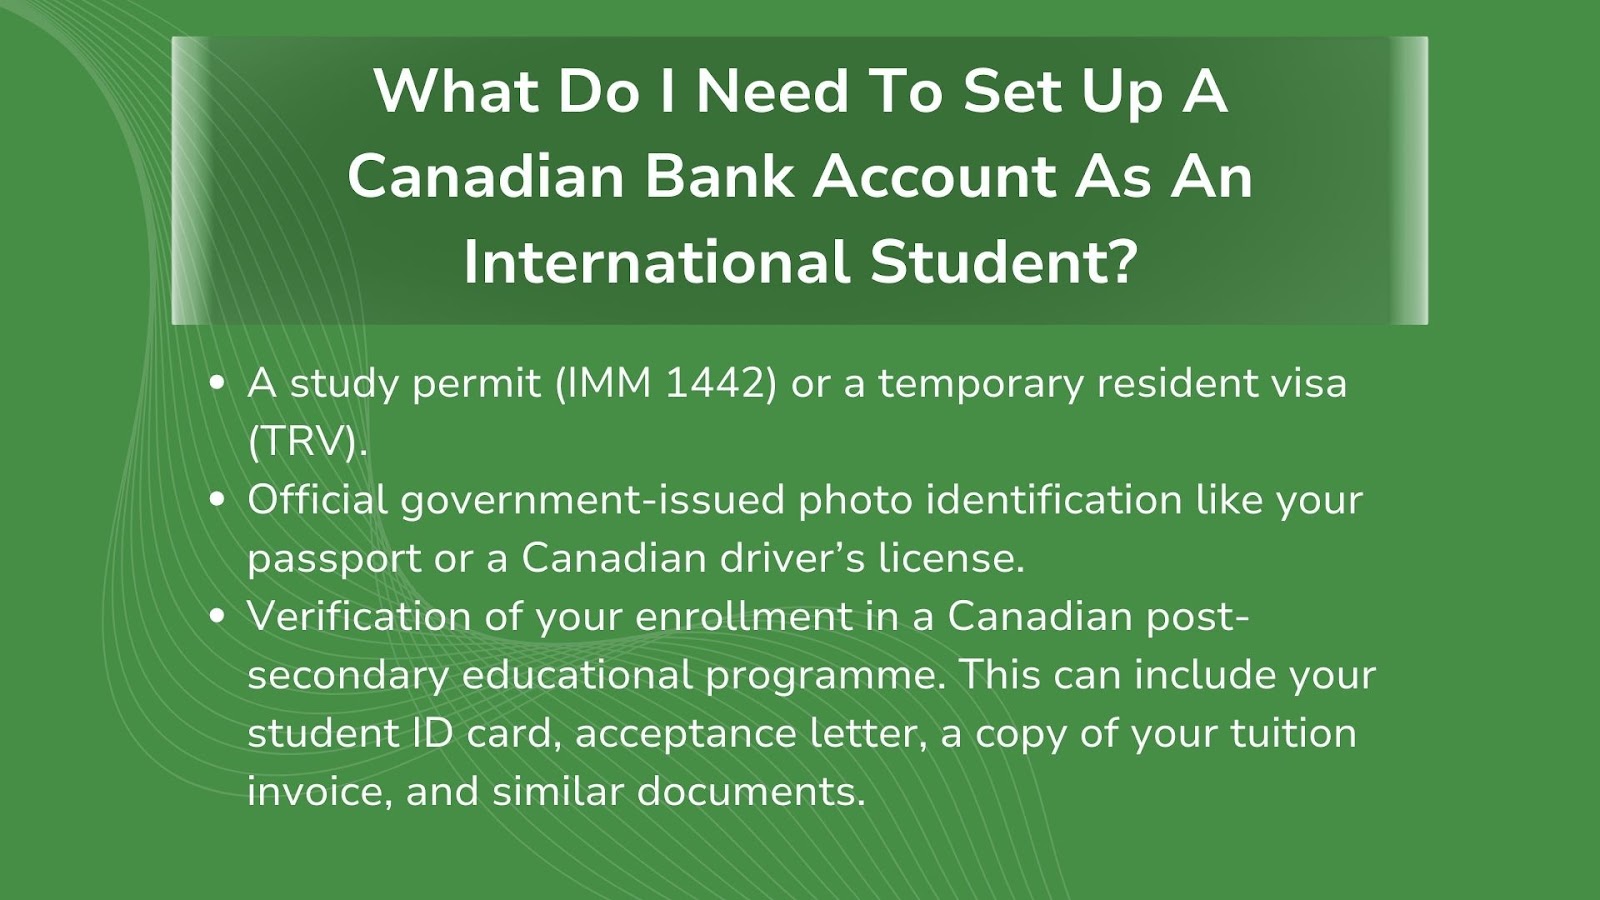 Documents needed to apply for a Canadian Bank account